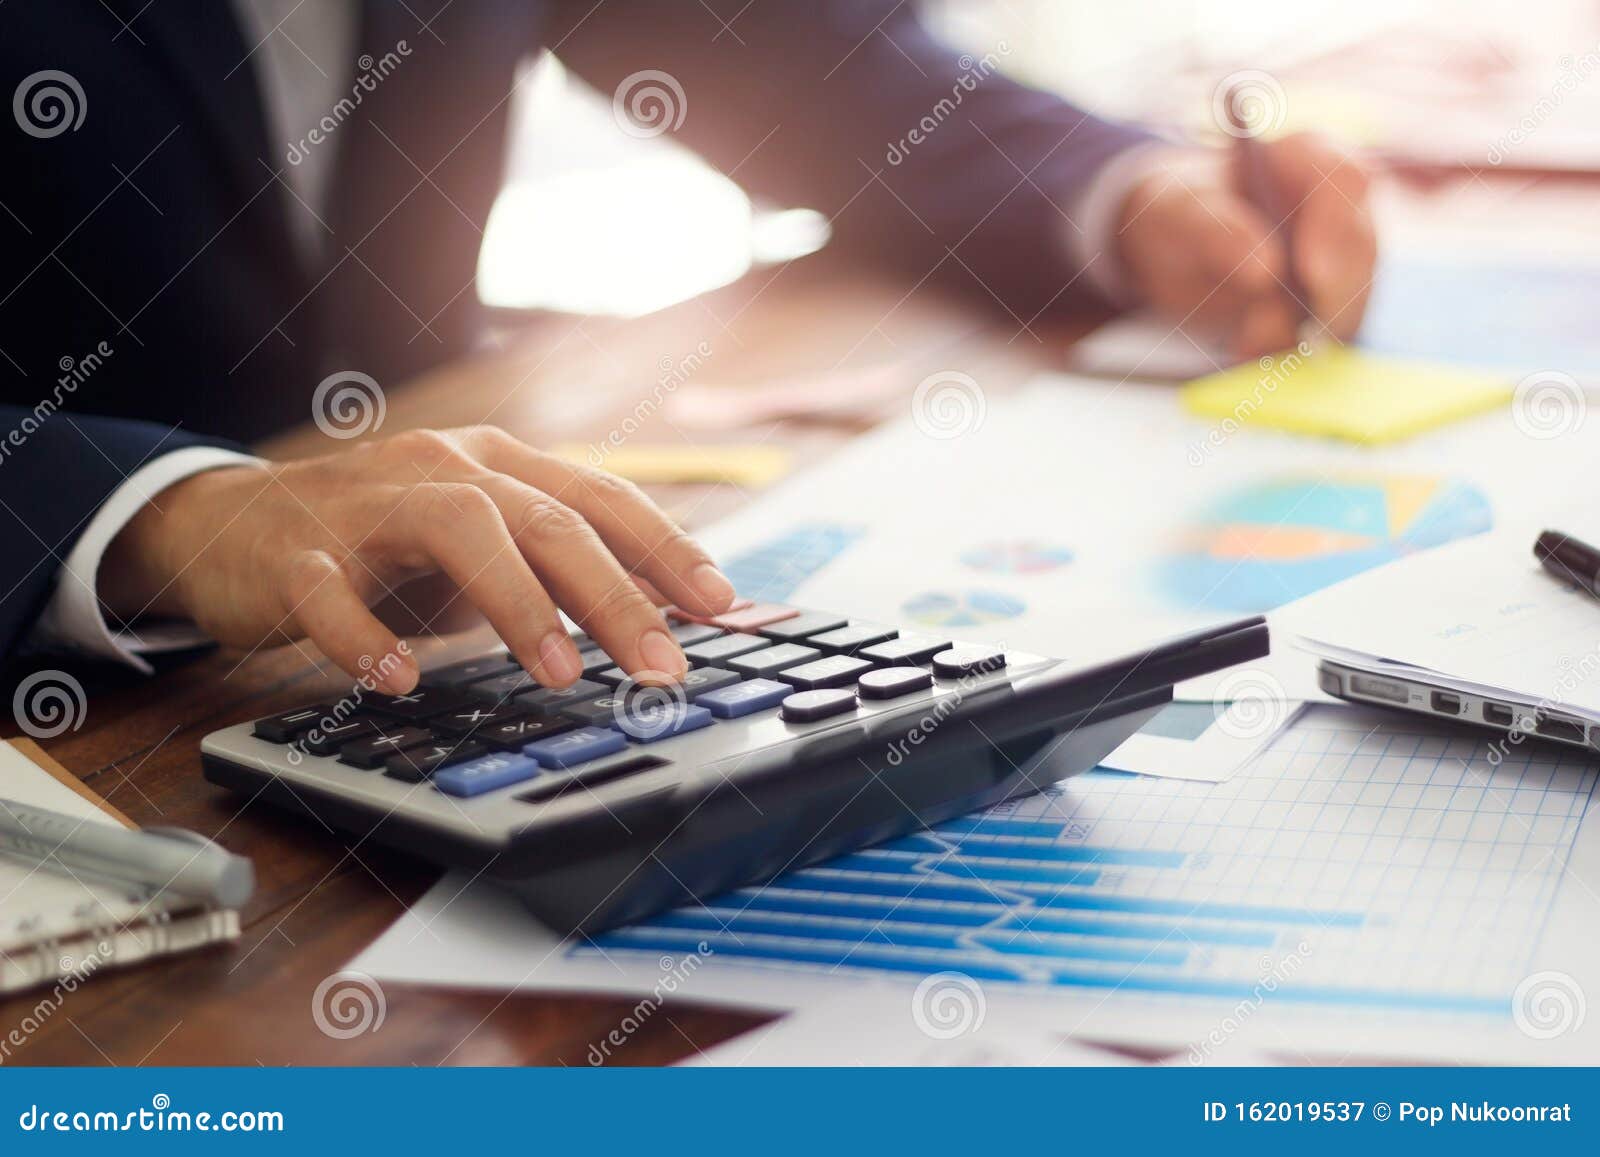 businessman using calculator to calculate budget, payments, business financing and accounting banking concept